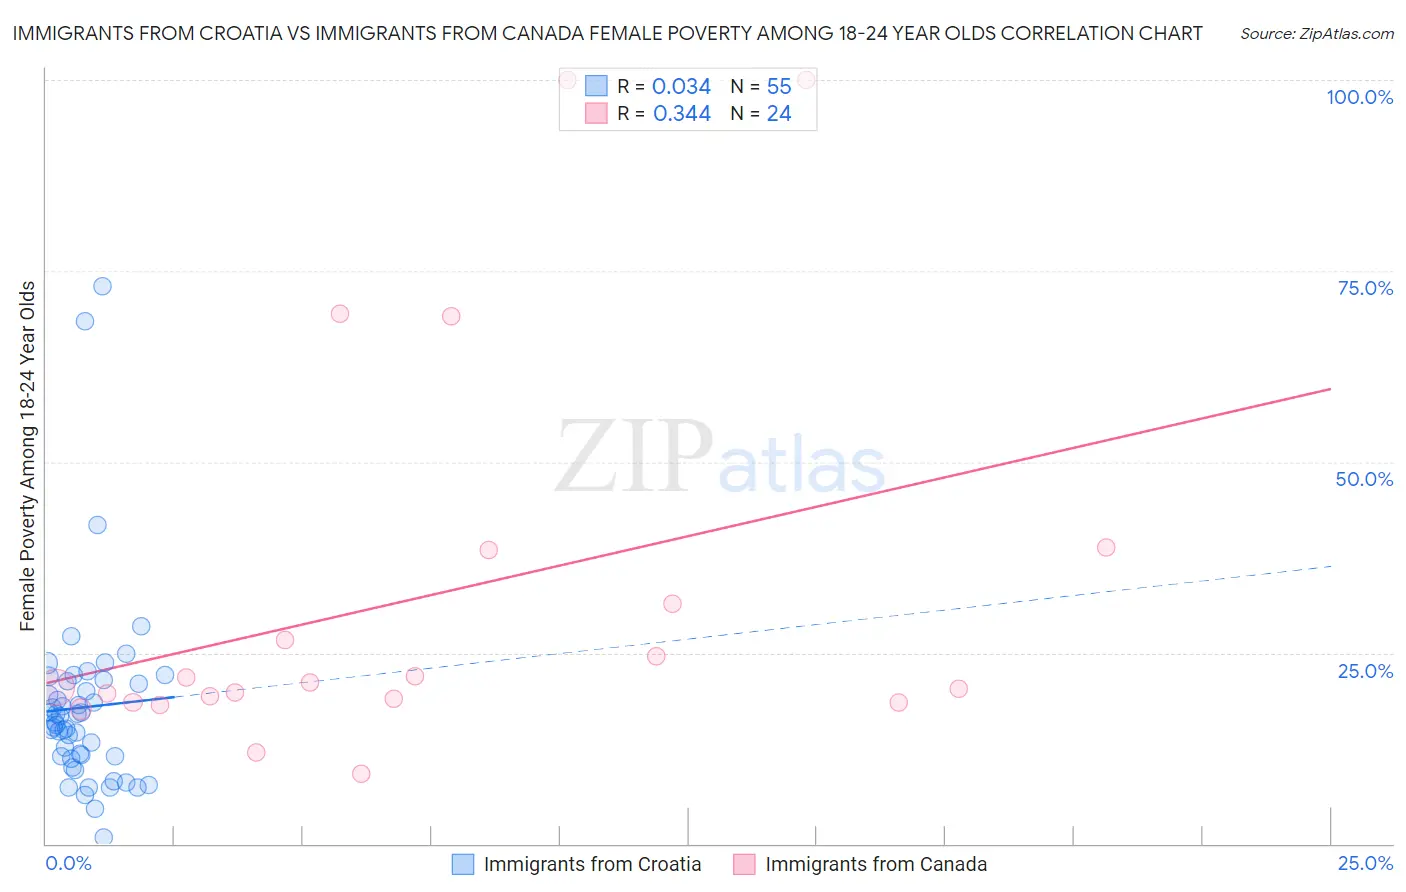 Immigrants from Croatia vs Immigrants from Canada Female Poverty Among 18-24 Year Olds